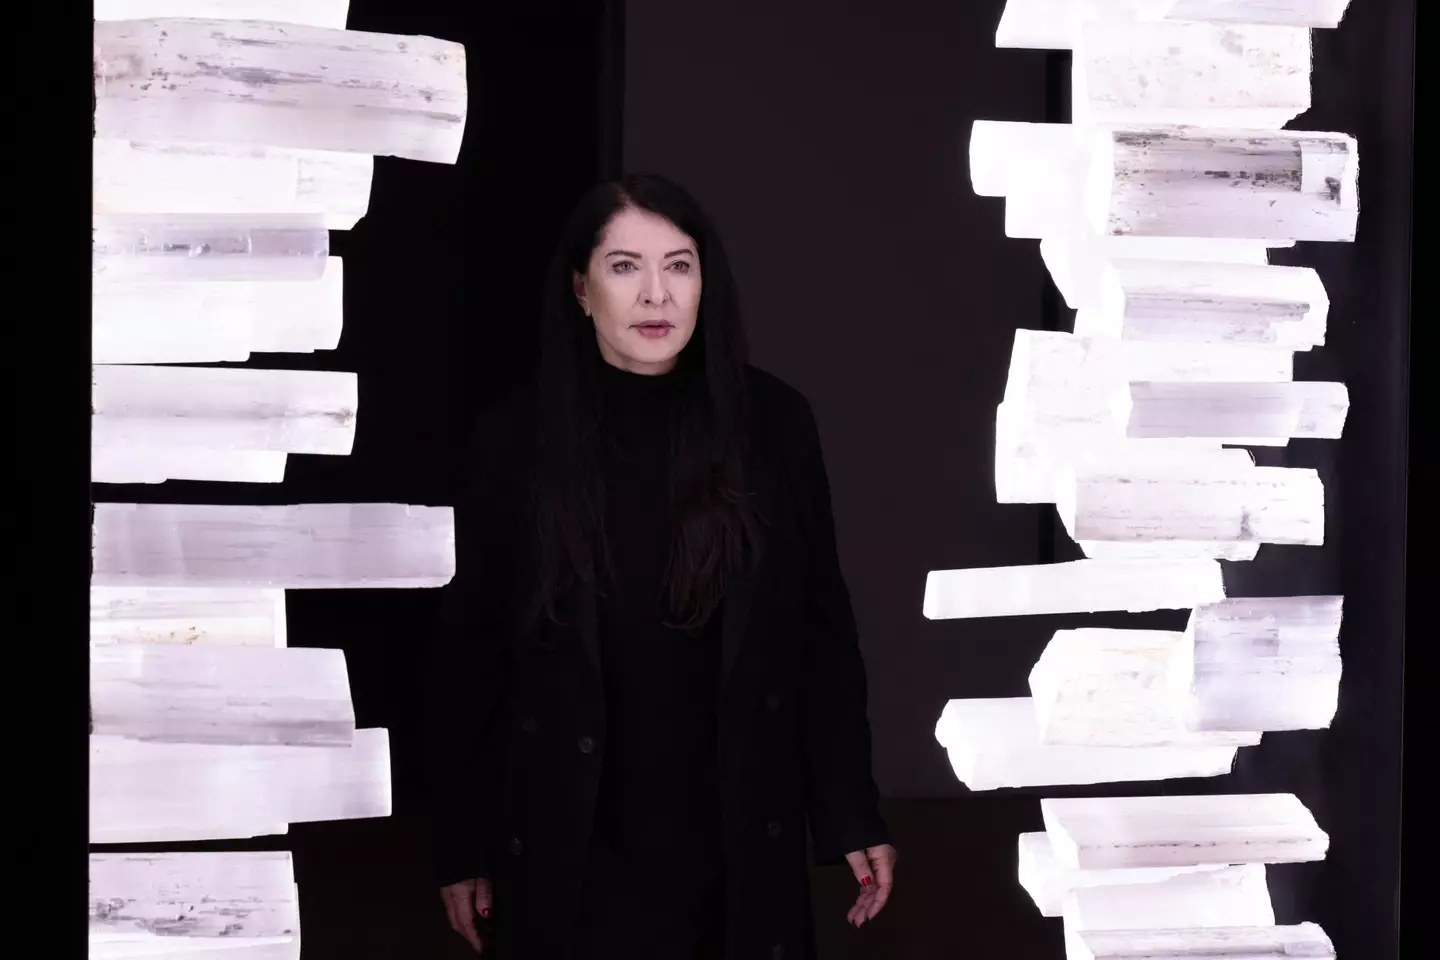 Abramovic performed her 'Rhythm 0' piece in 1974. (NICK GAMMON/AFP via Getty Images)